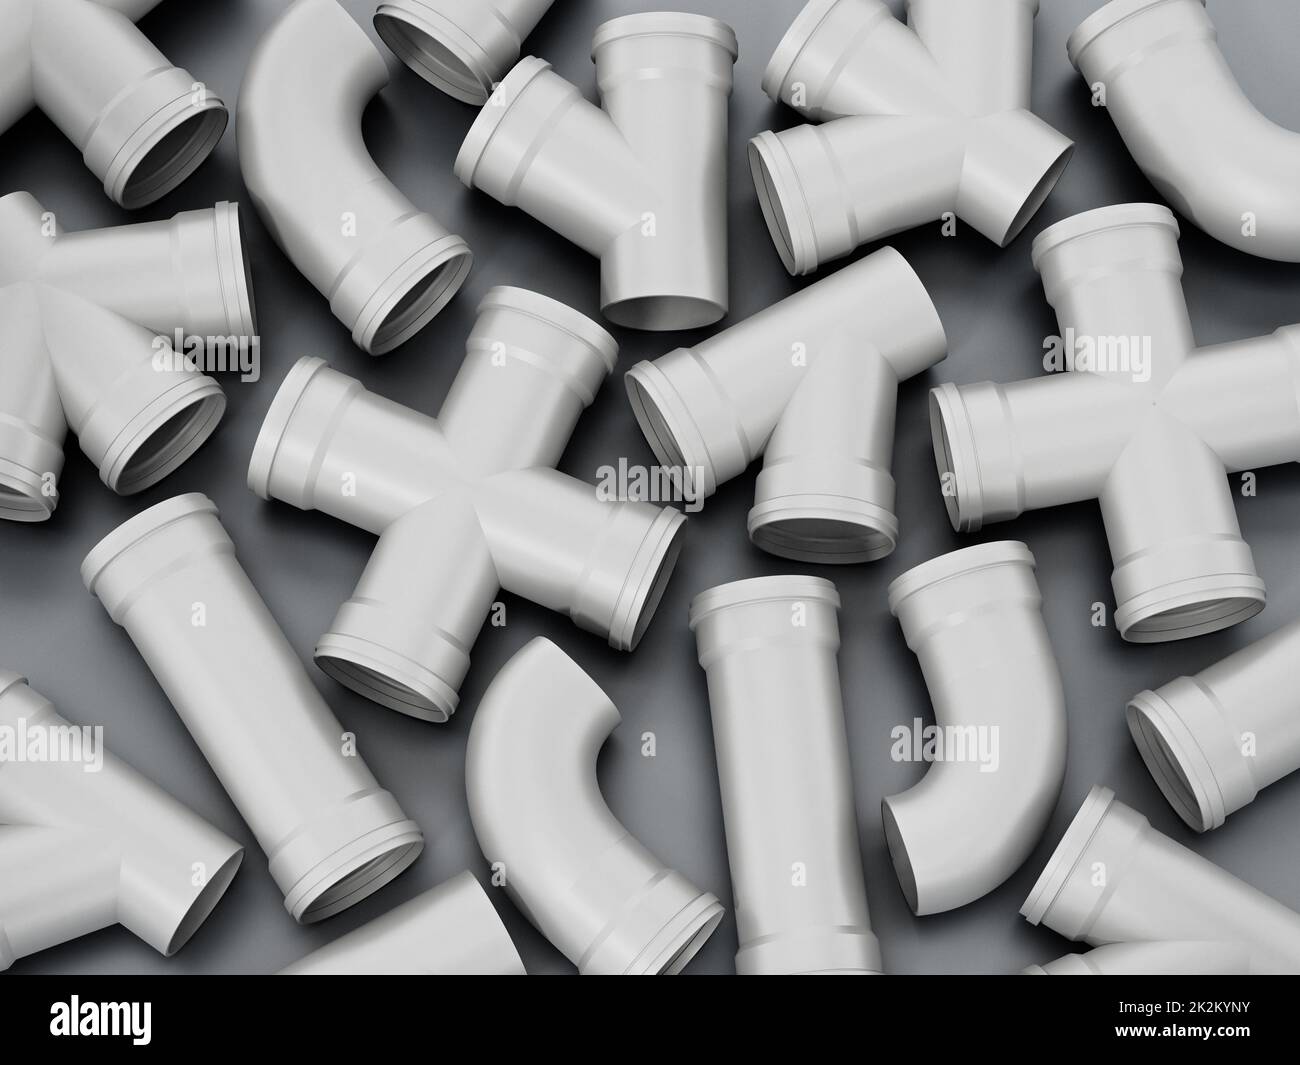 PVC water tube connection parts on gray background. 3D illustration Stock Photo